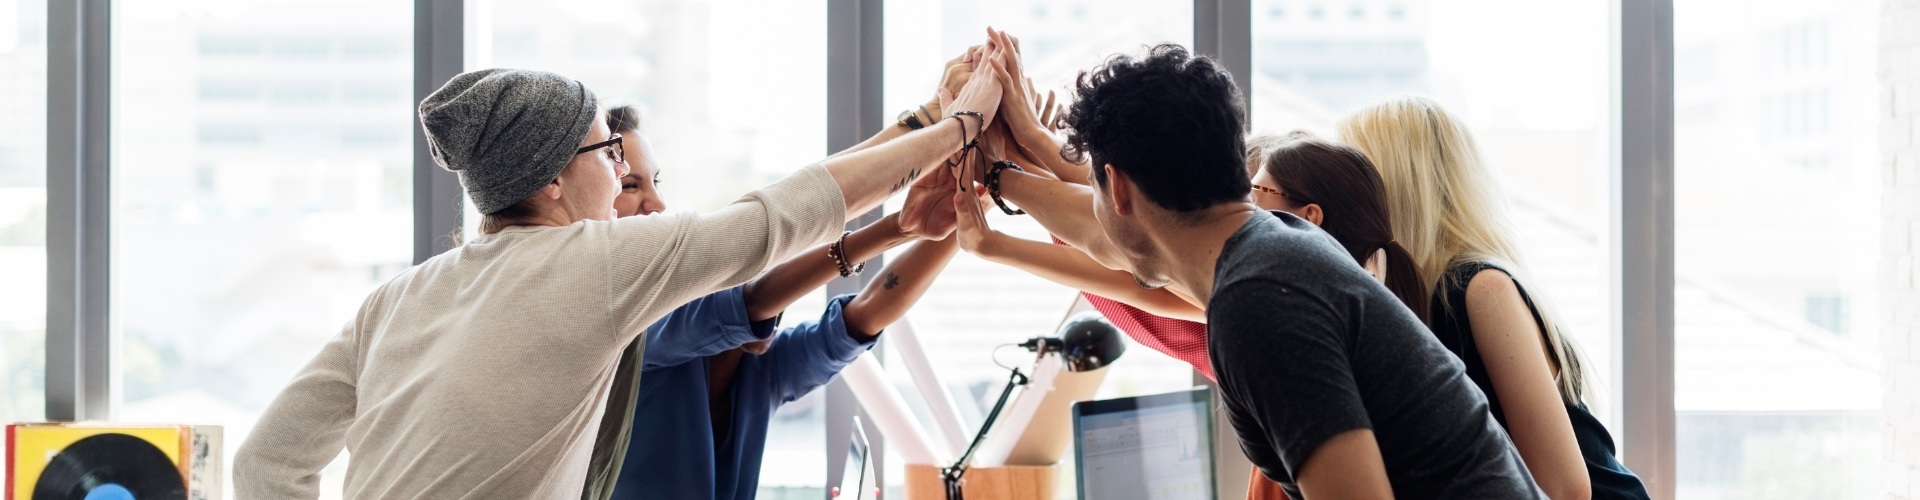 Teamwork Power Successful Meeting Workplace Concept